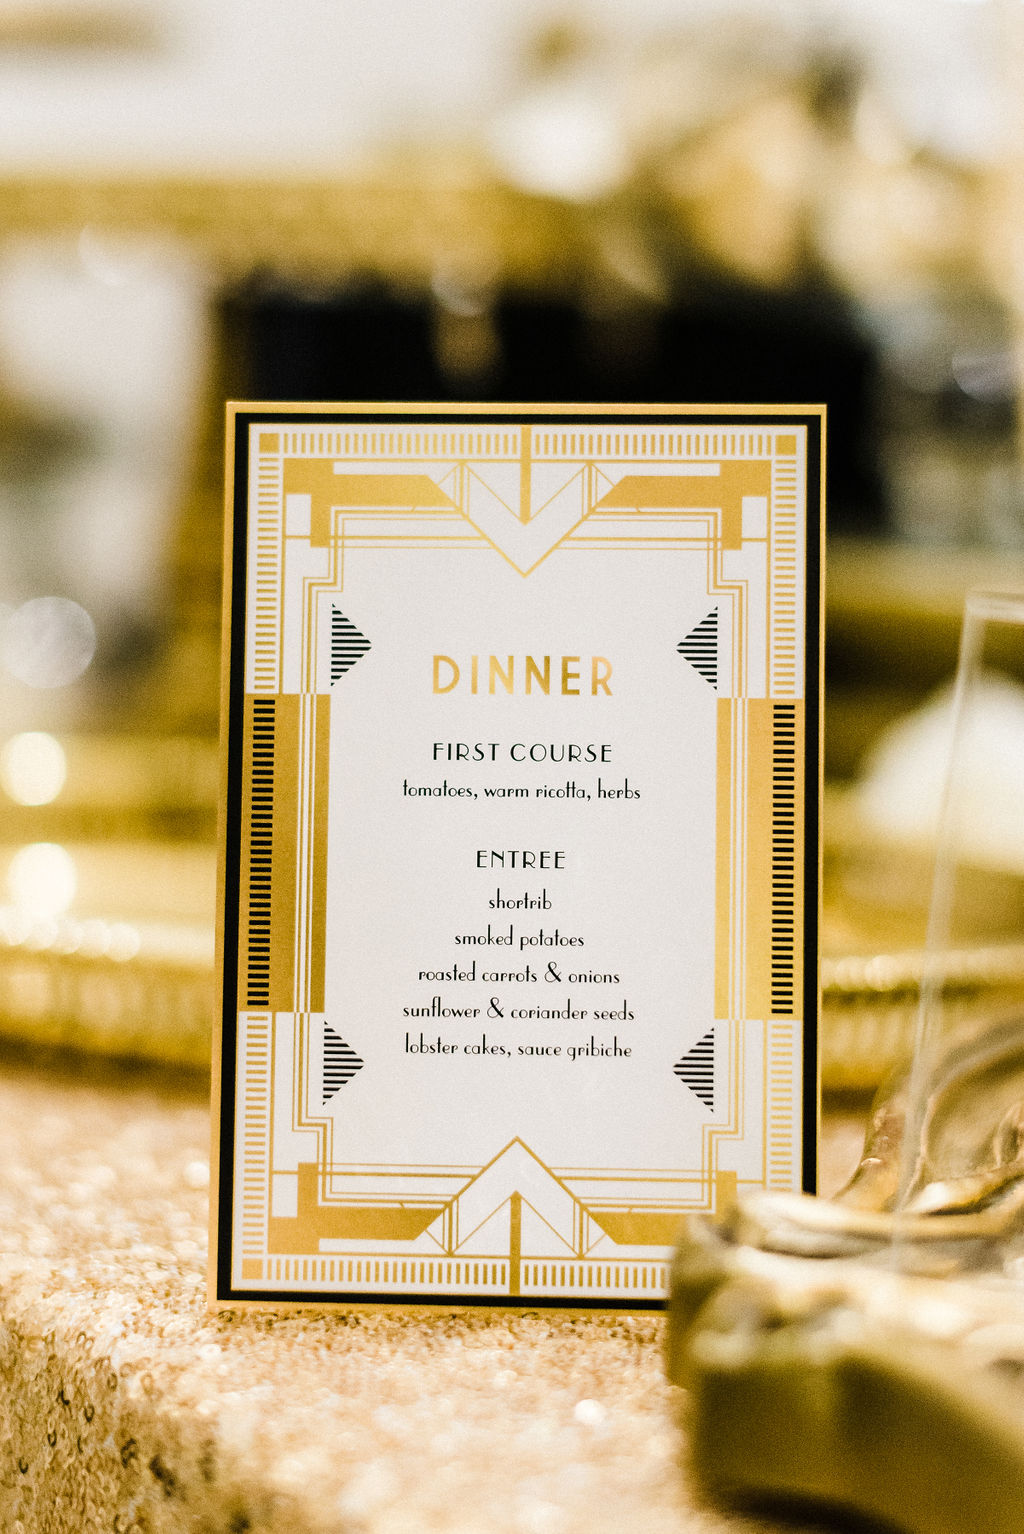 Tyler Anderson's wedding dinner menu at The Goodwin Hotel - Pearl Weddings &amp; Events